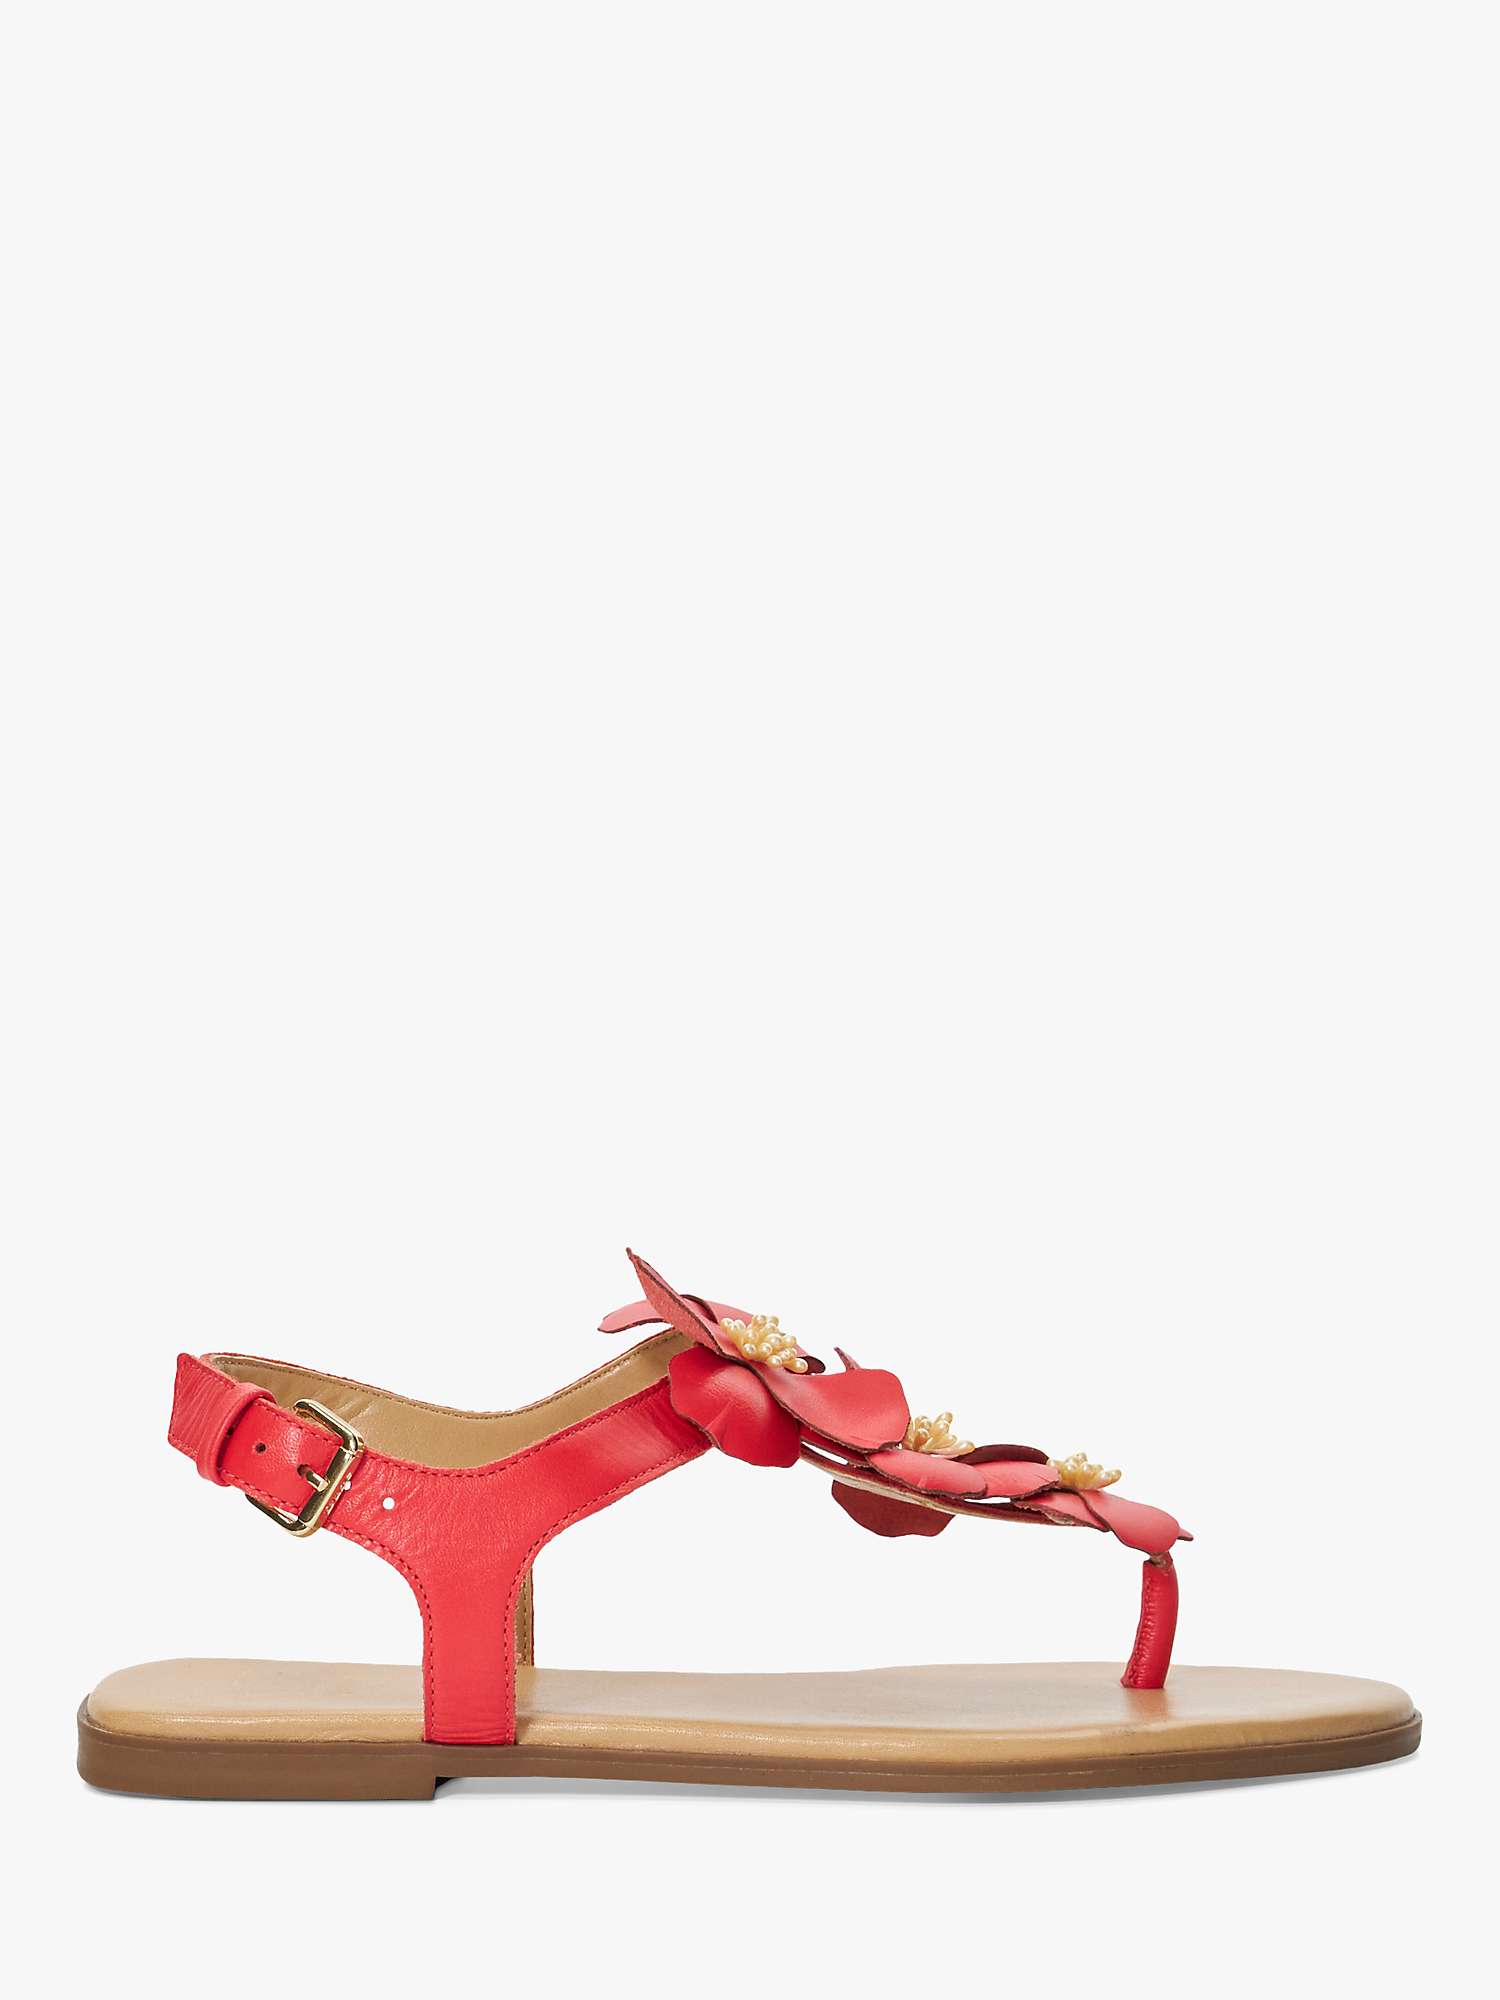 Buy Dune Linaria Flower Leather Sandals, Red Online at johnlewis.com